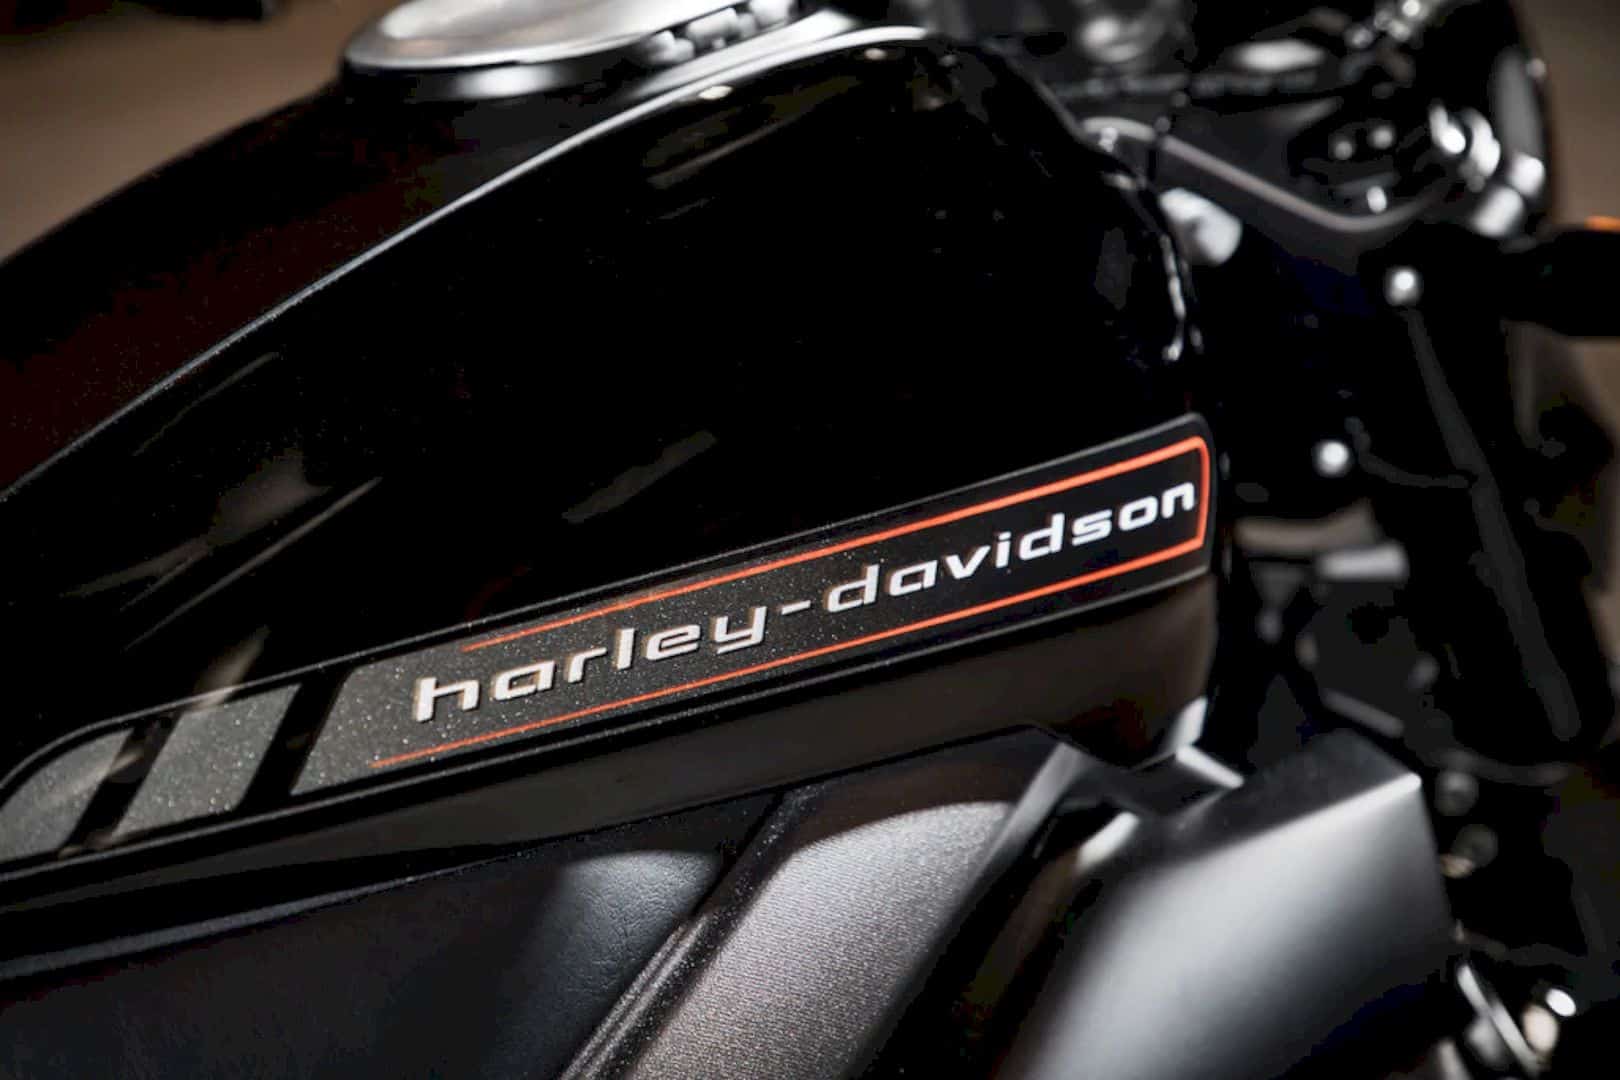 Future Vehicles From Harley Davidson 2